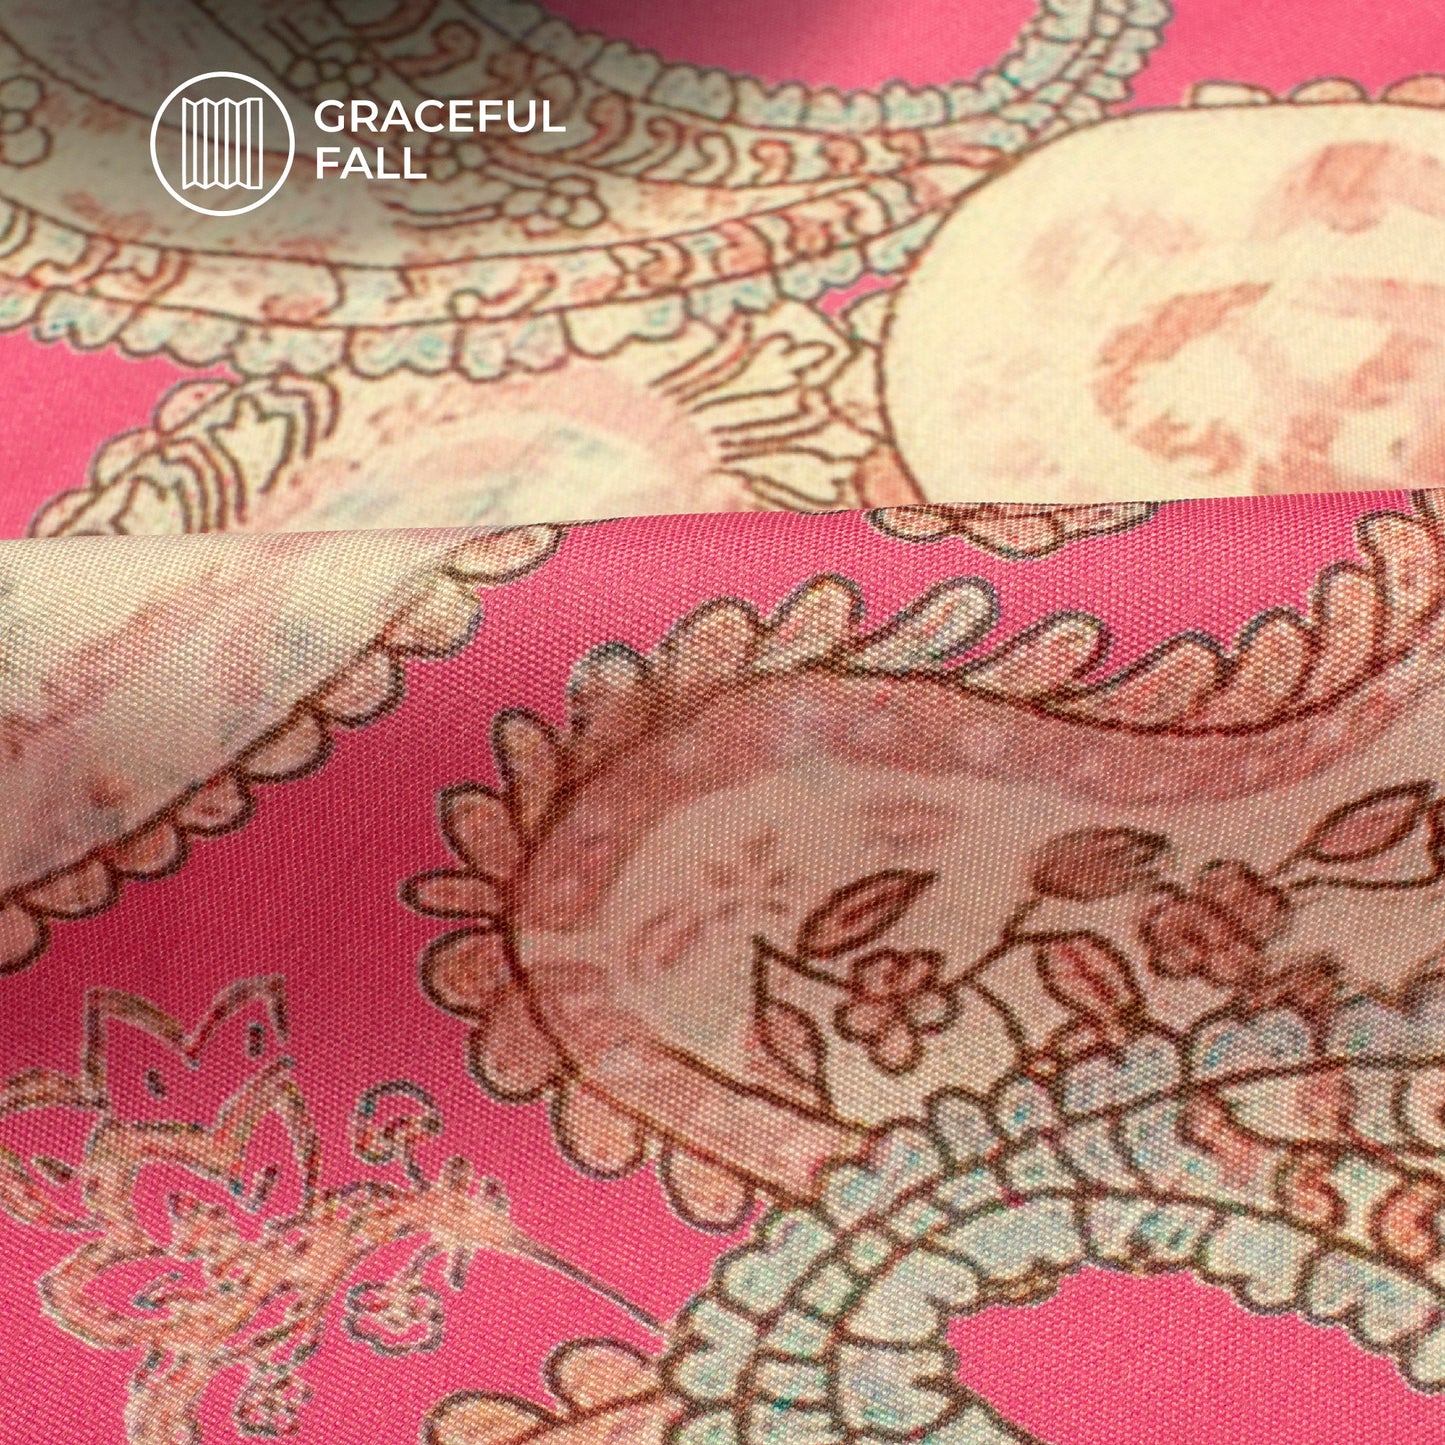 Blush Pink And Blush Pink Paisely Digital Print Butter Crepe Fabric